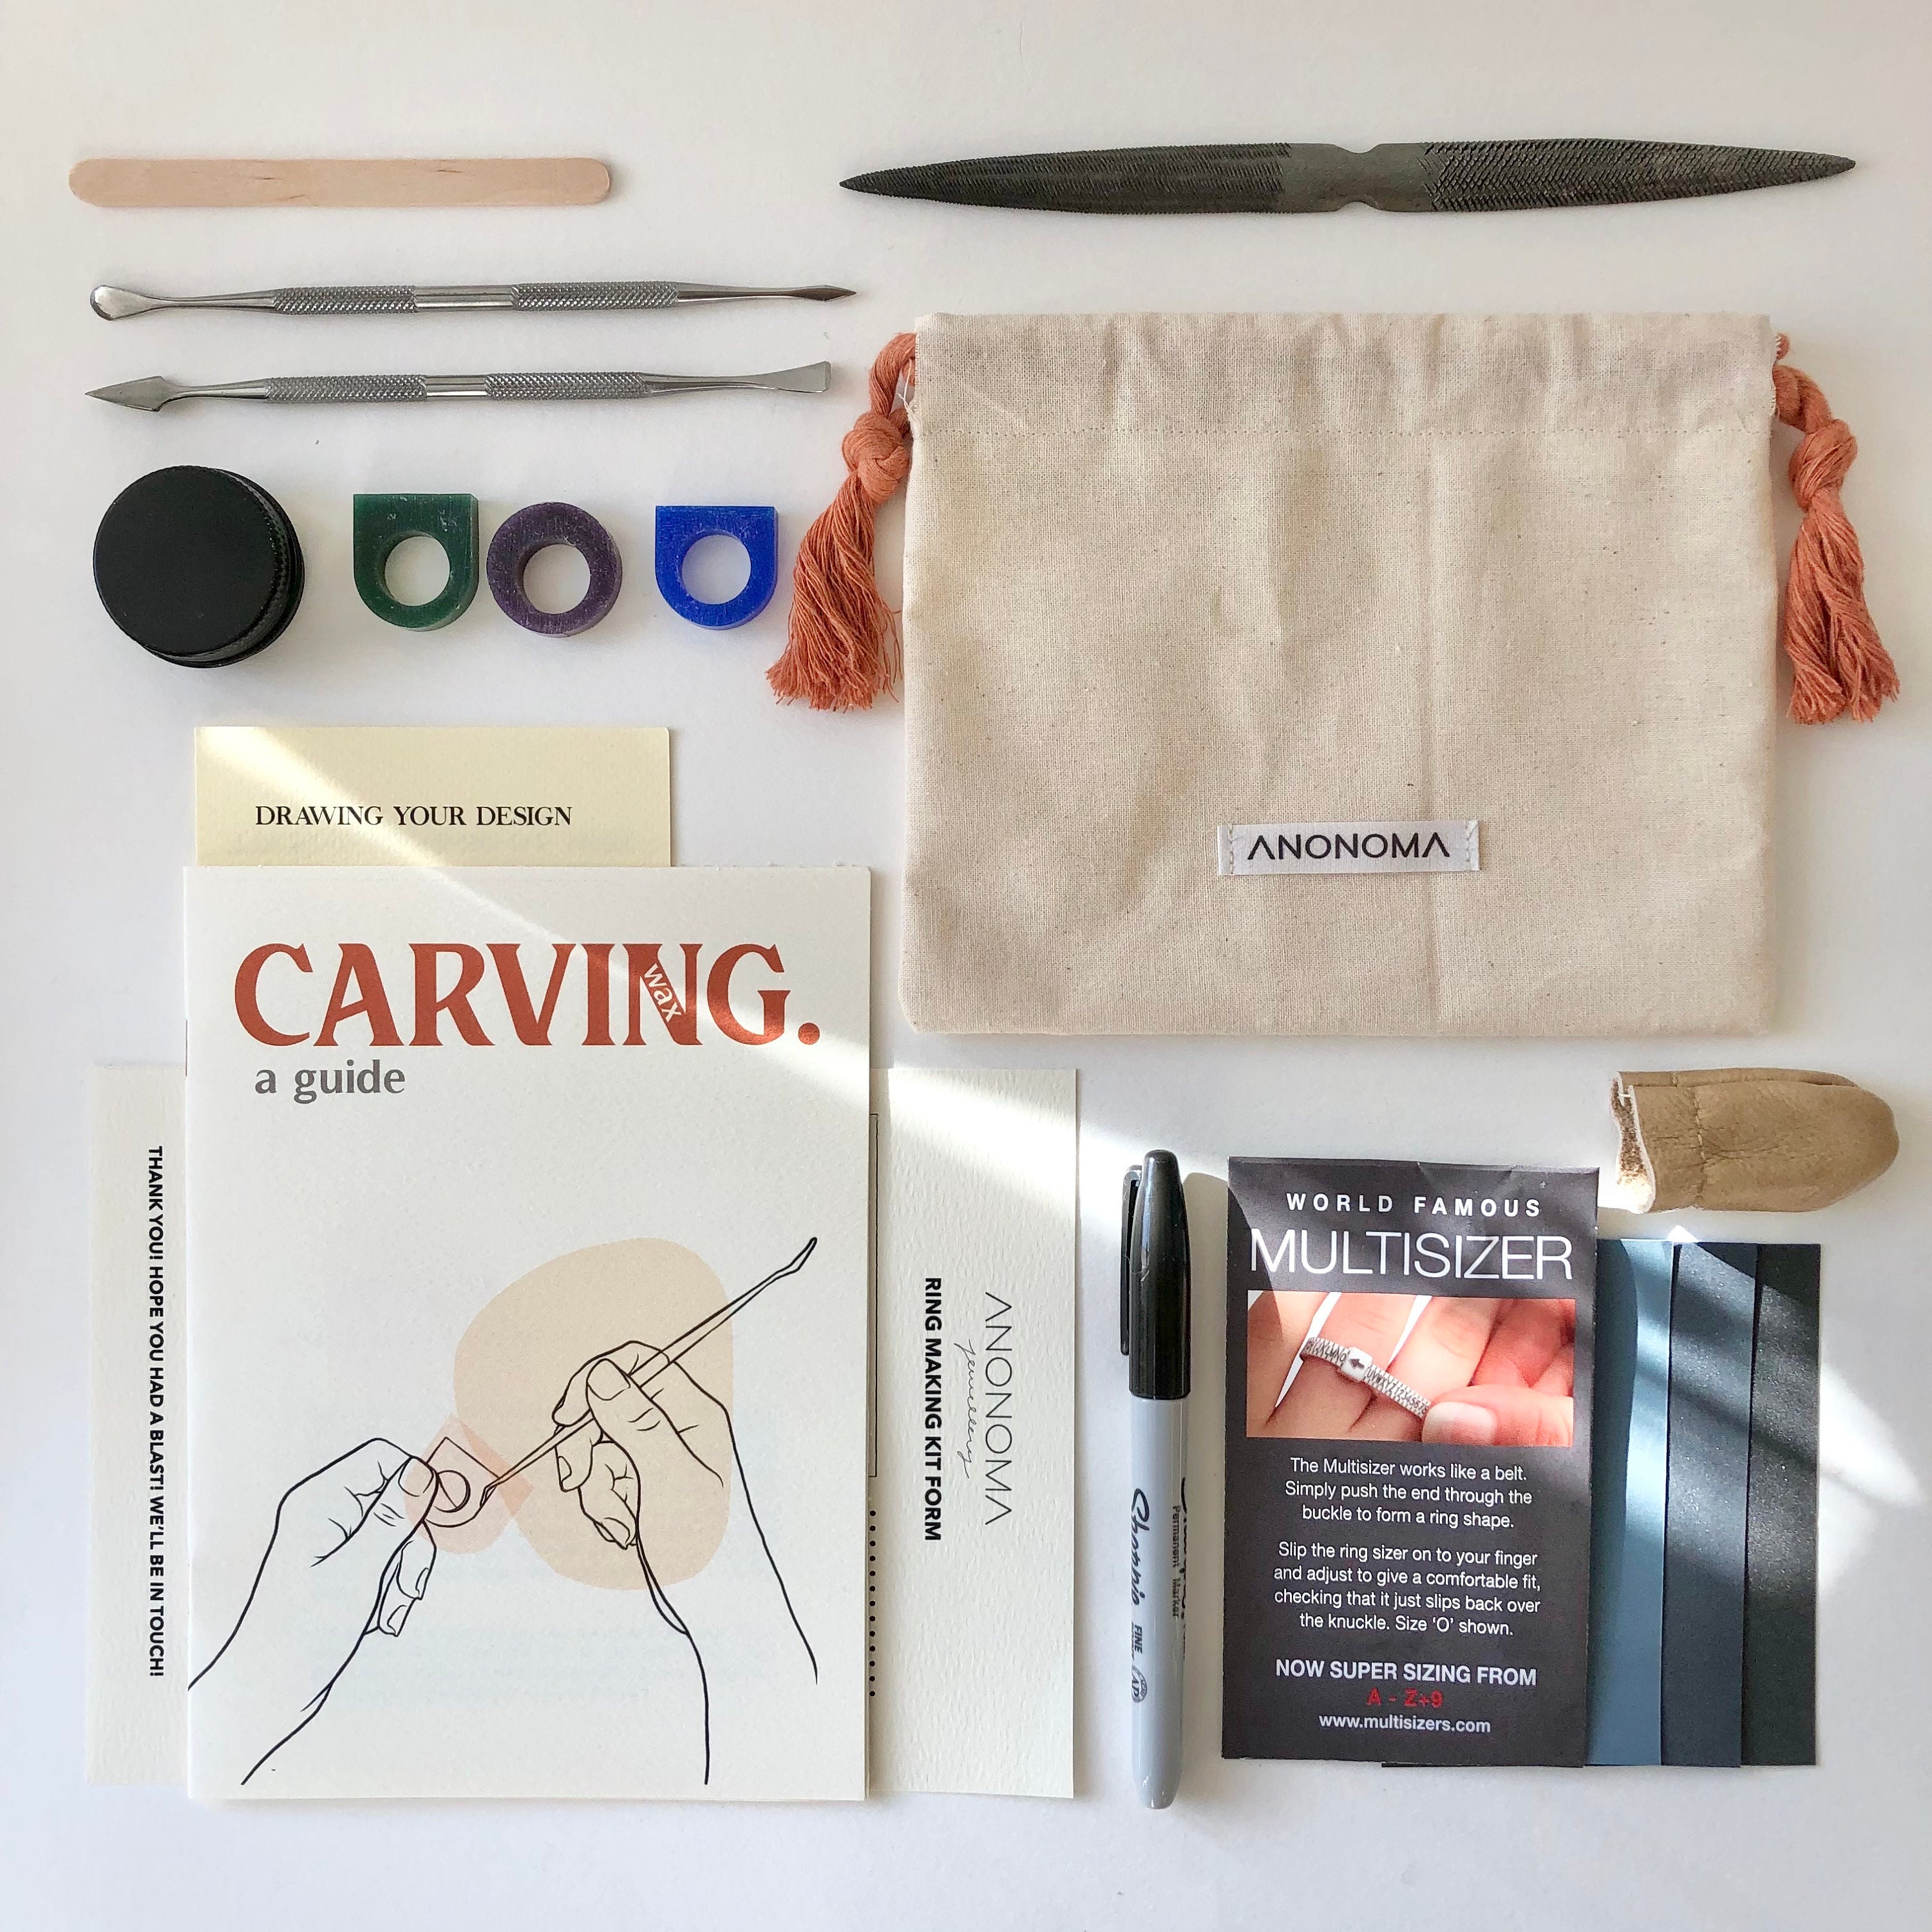 Carve Your Own Ring Kit – quenchkit